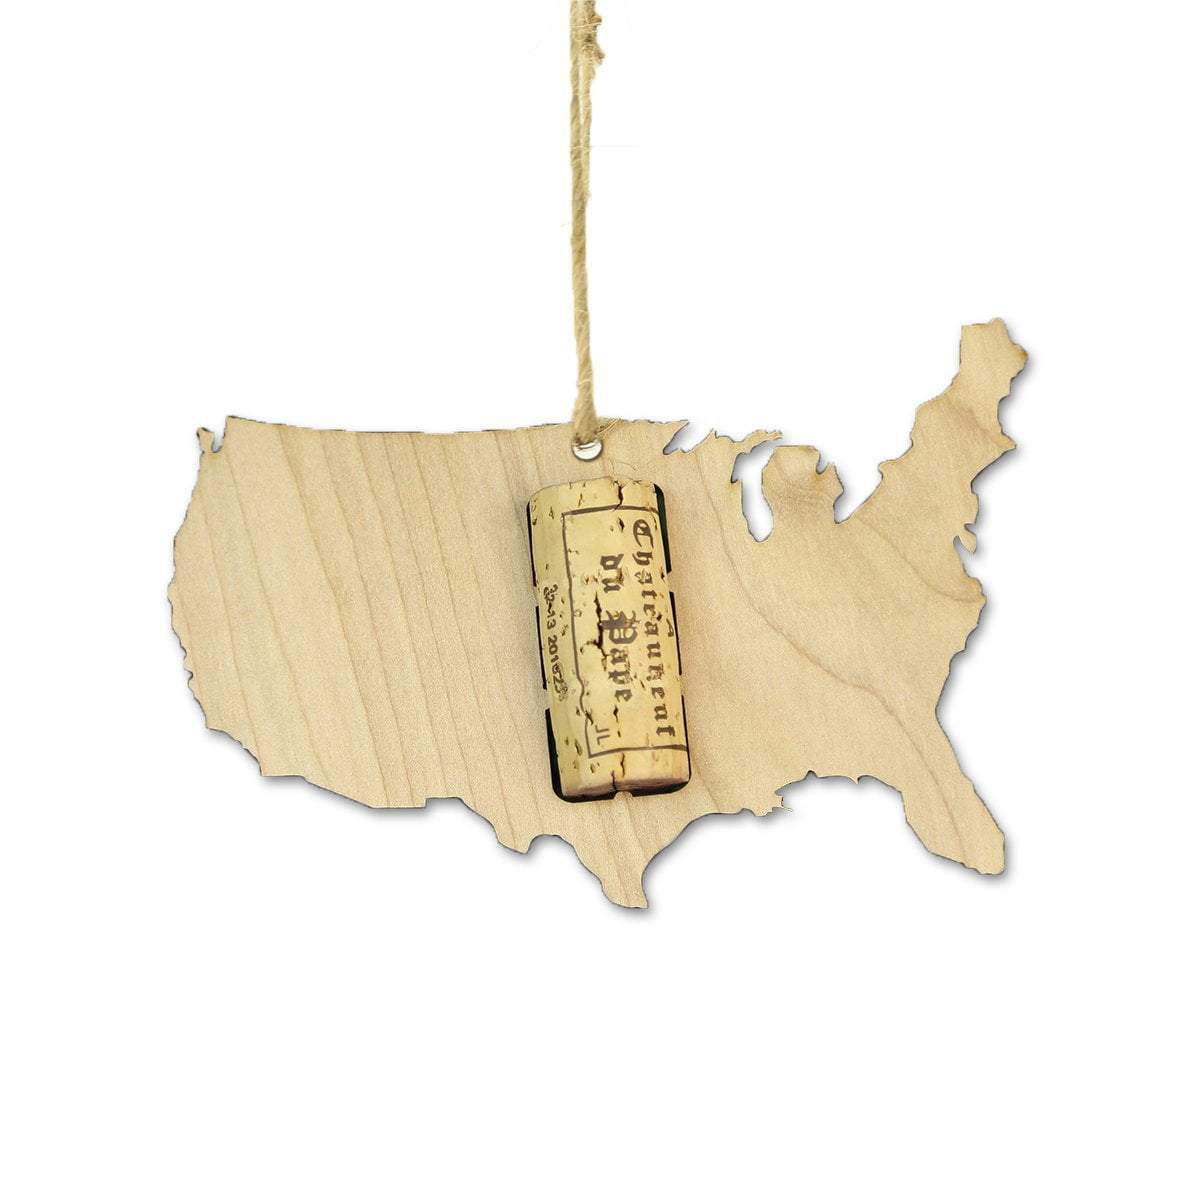 Torched Products Wine Cork Holder USA Wine Cork Holder Ornaments (781194362997)